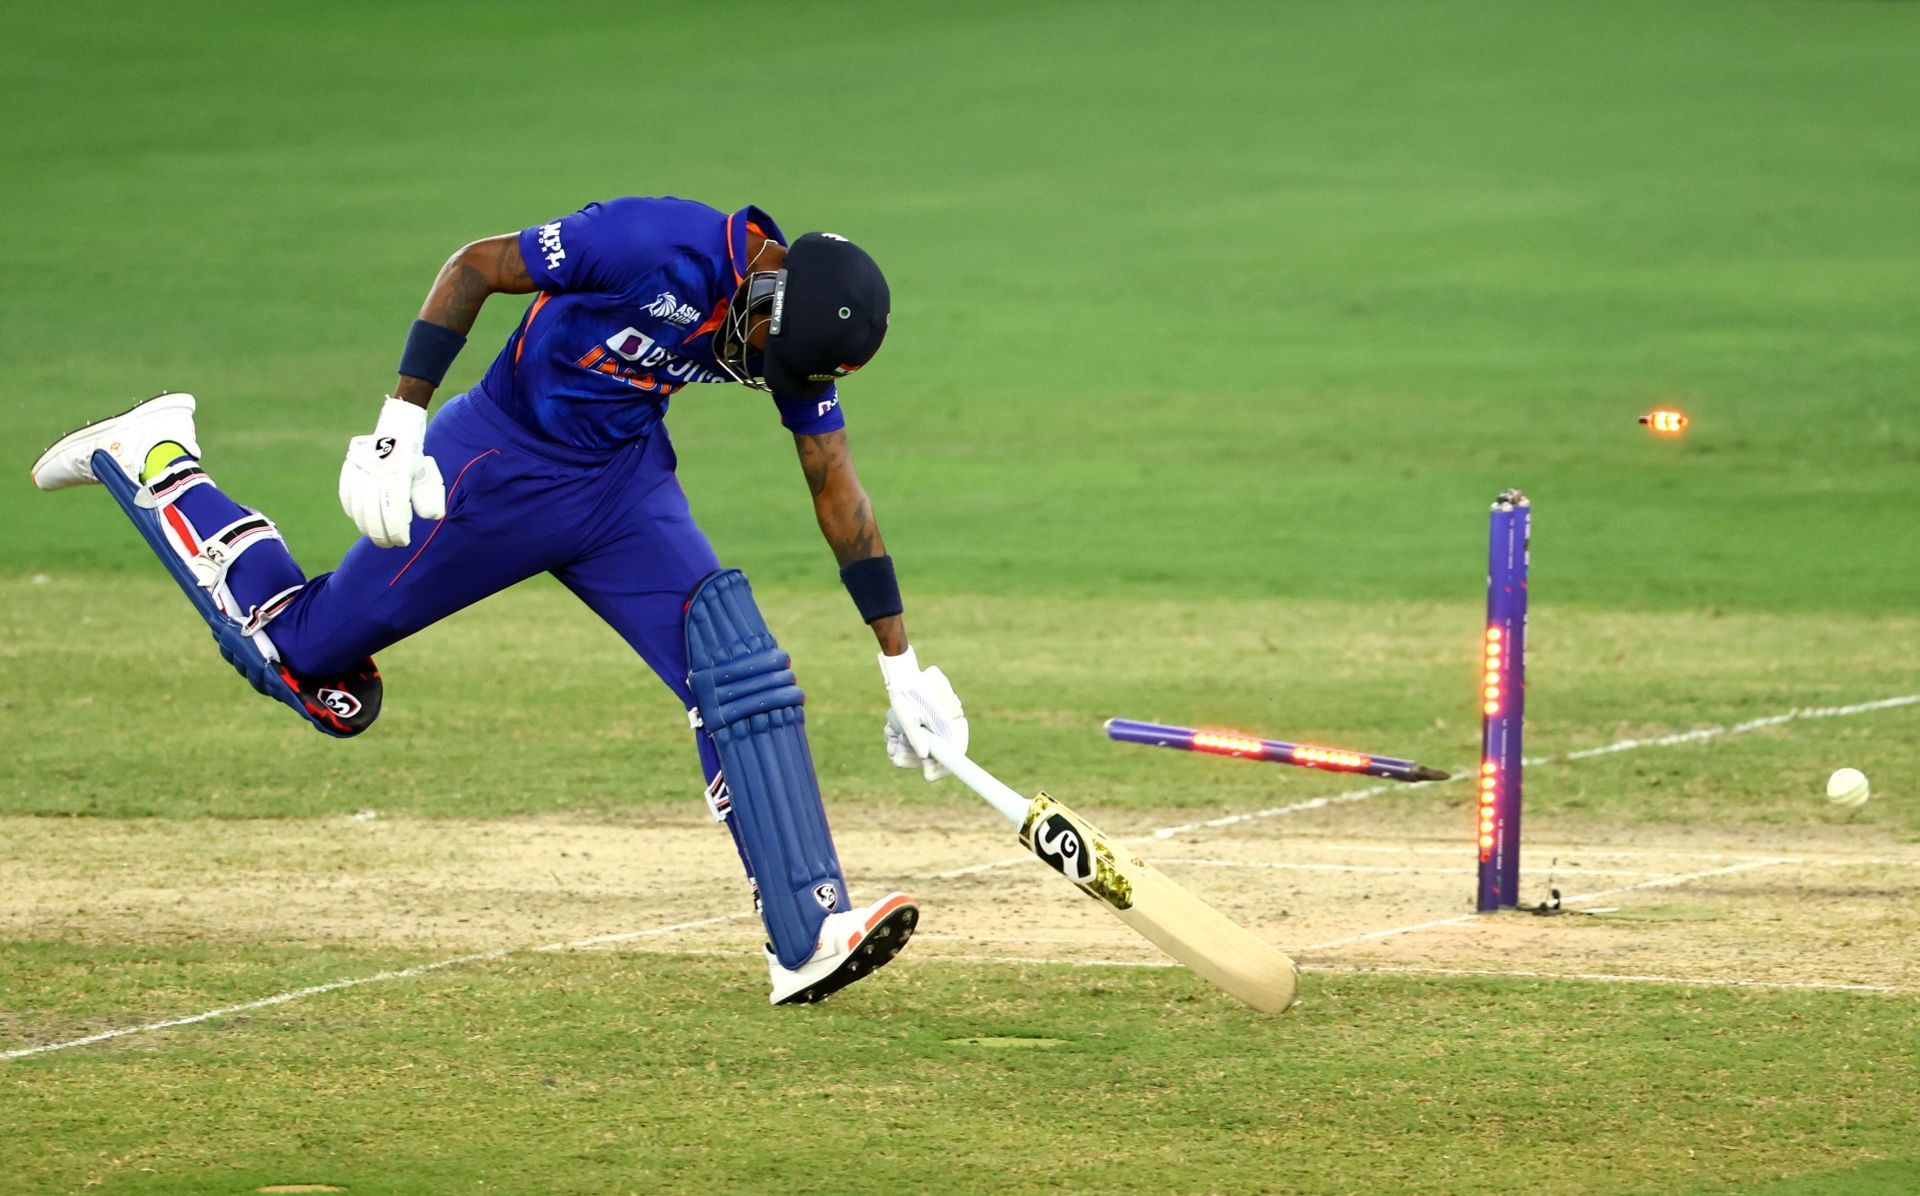 Hardik Pandya was dismissed for 17 just when his team needed him to accelerate.